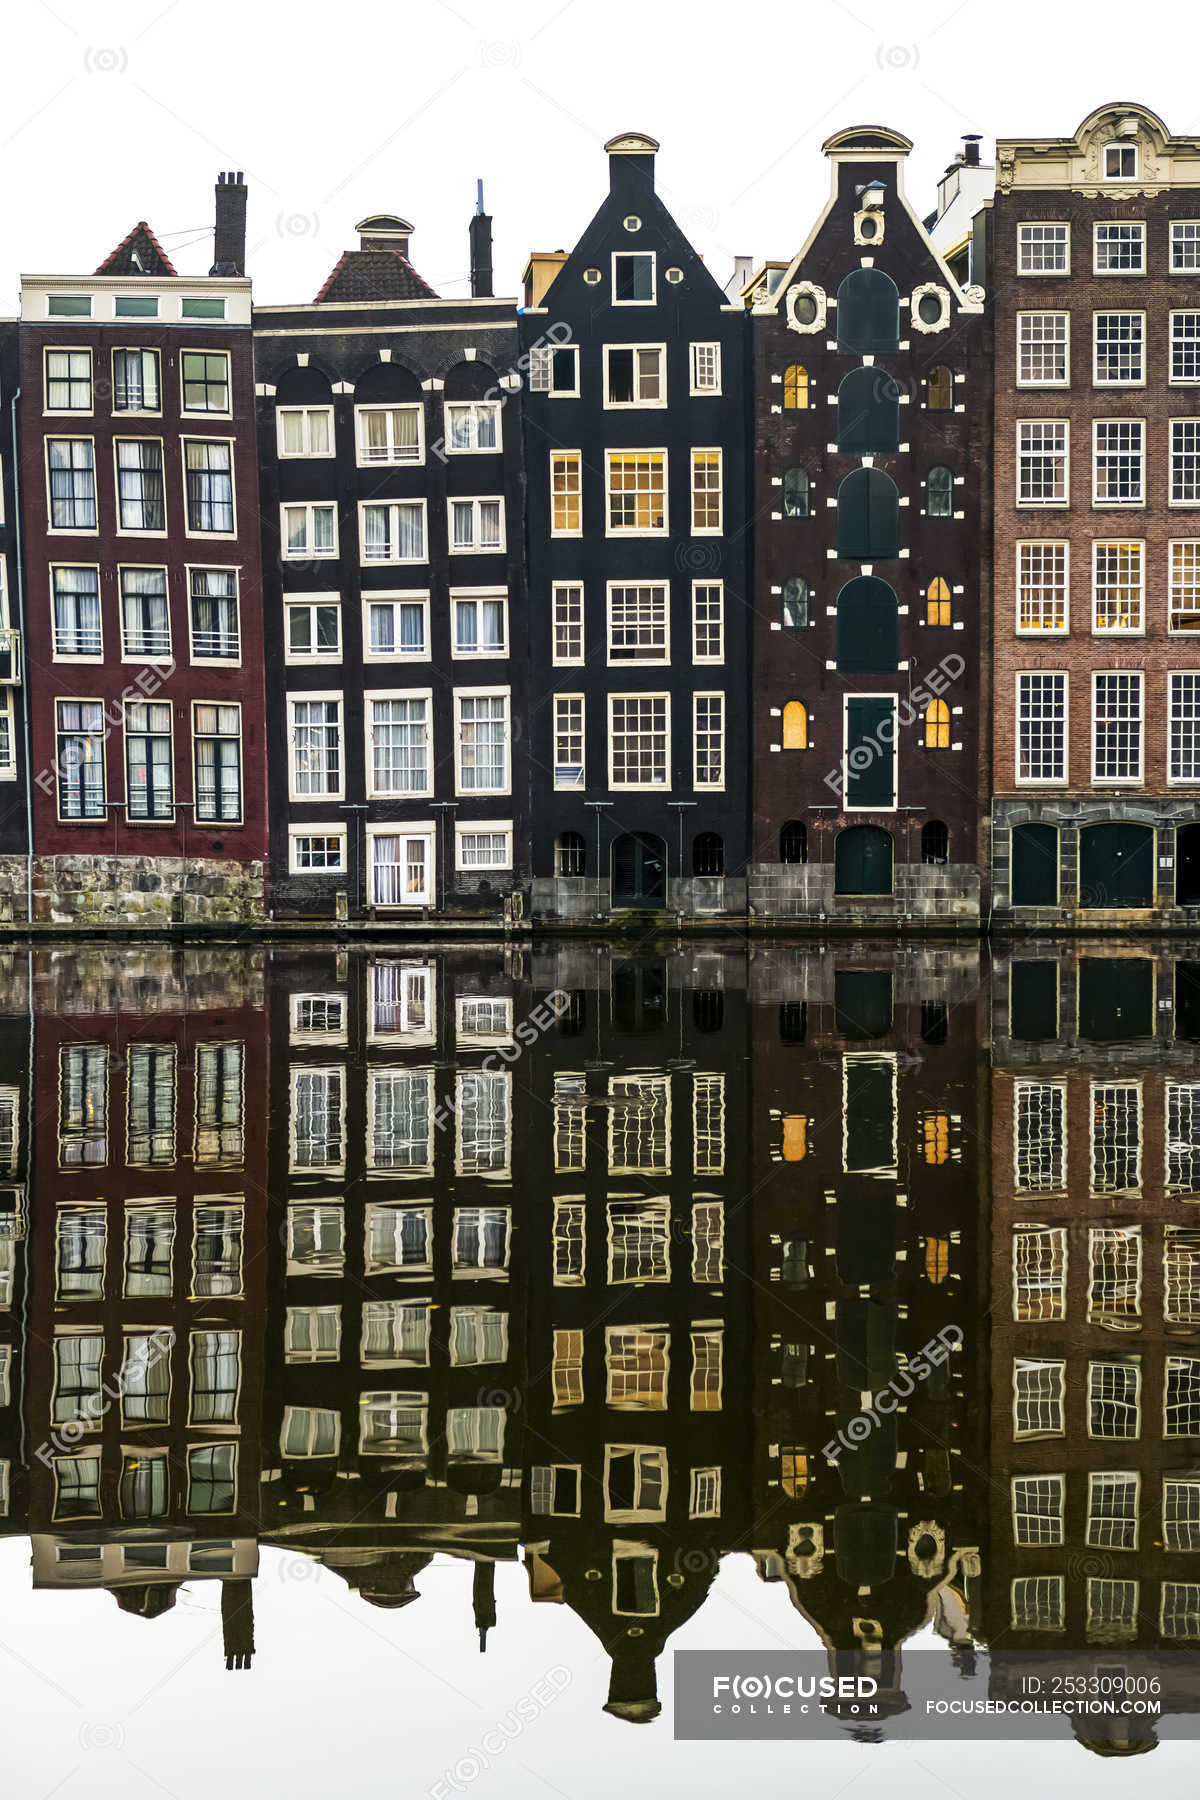 Building facades with a mirror image reflecting in a canal; Amsterdam, Netherlands — place of interest, buildings - Stock Photo #253309006